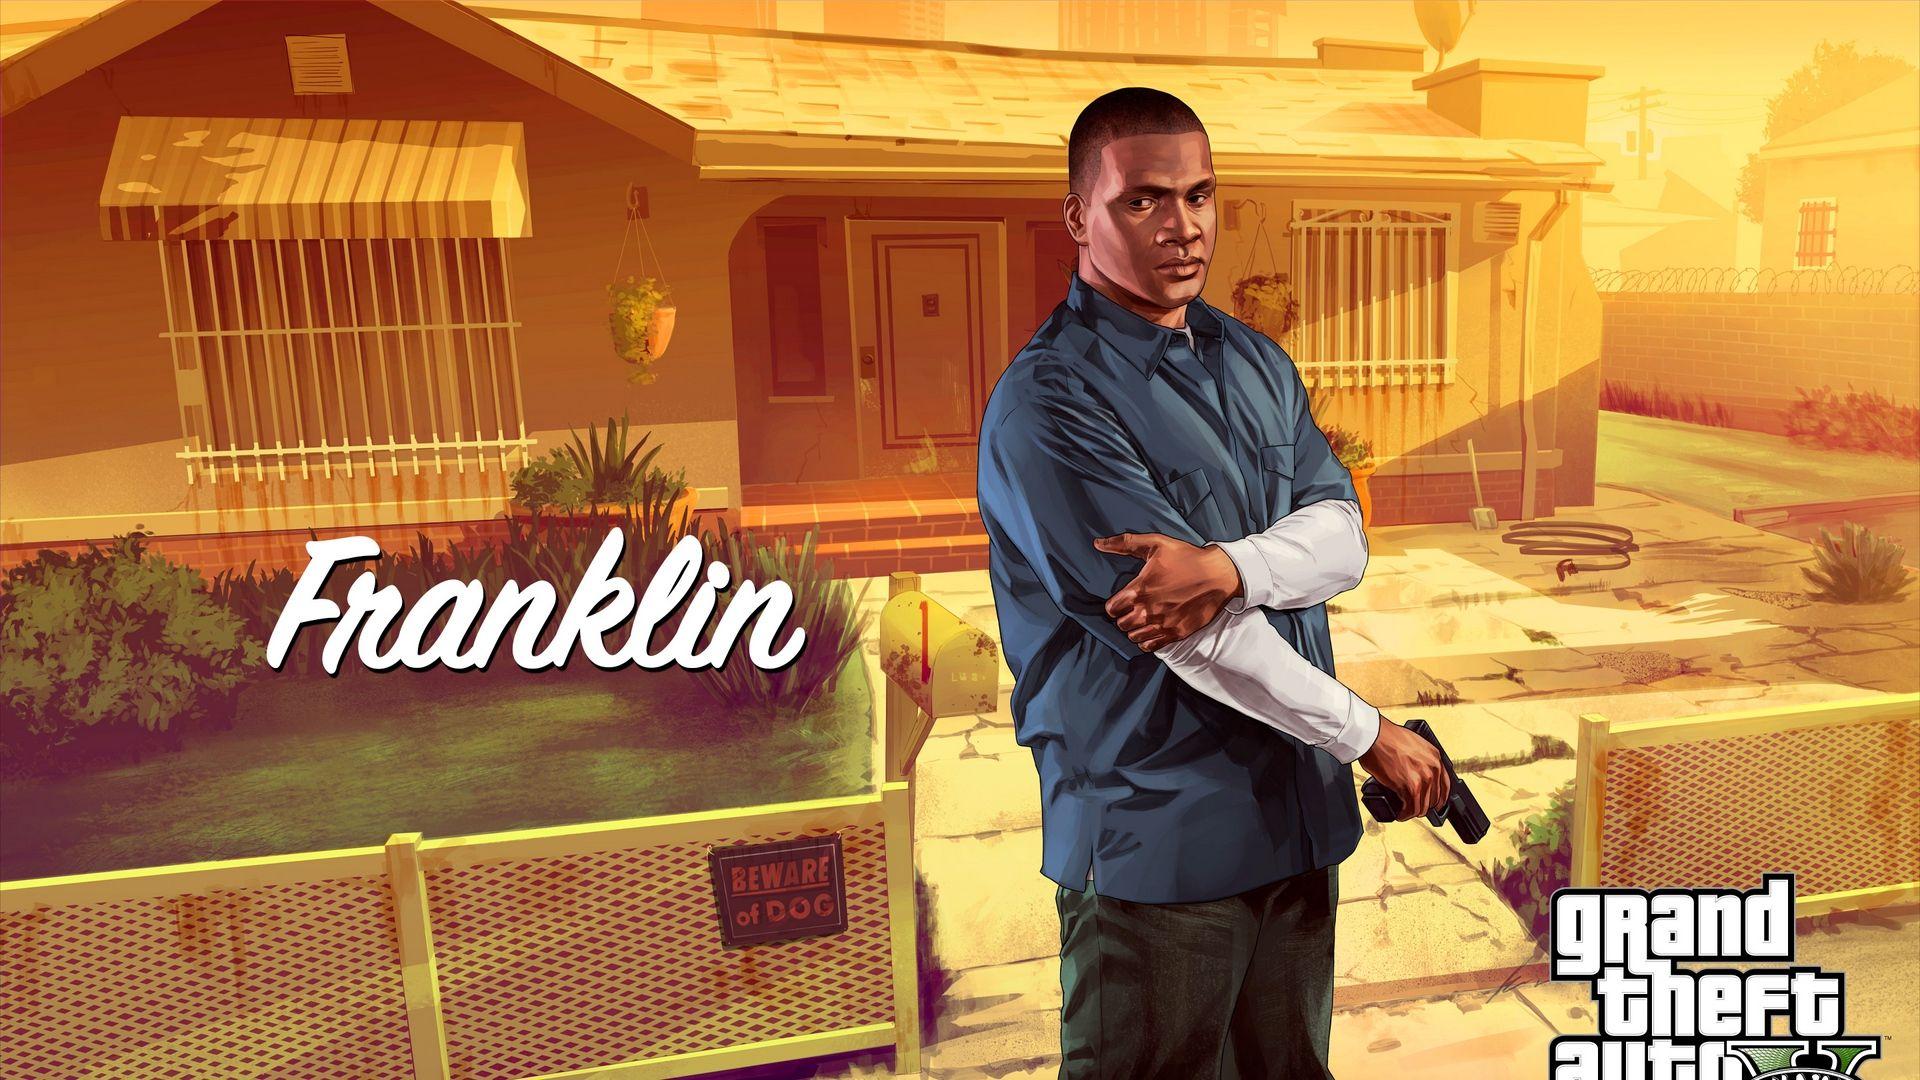 1440p grand theft auto v wallpapers